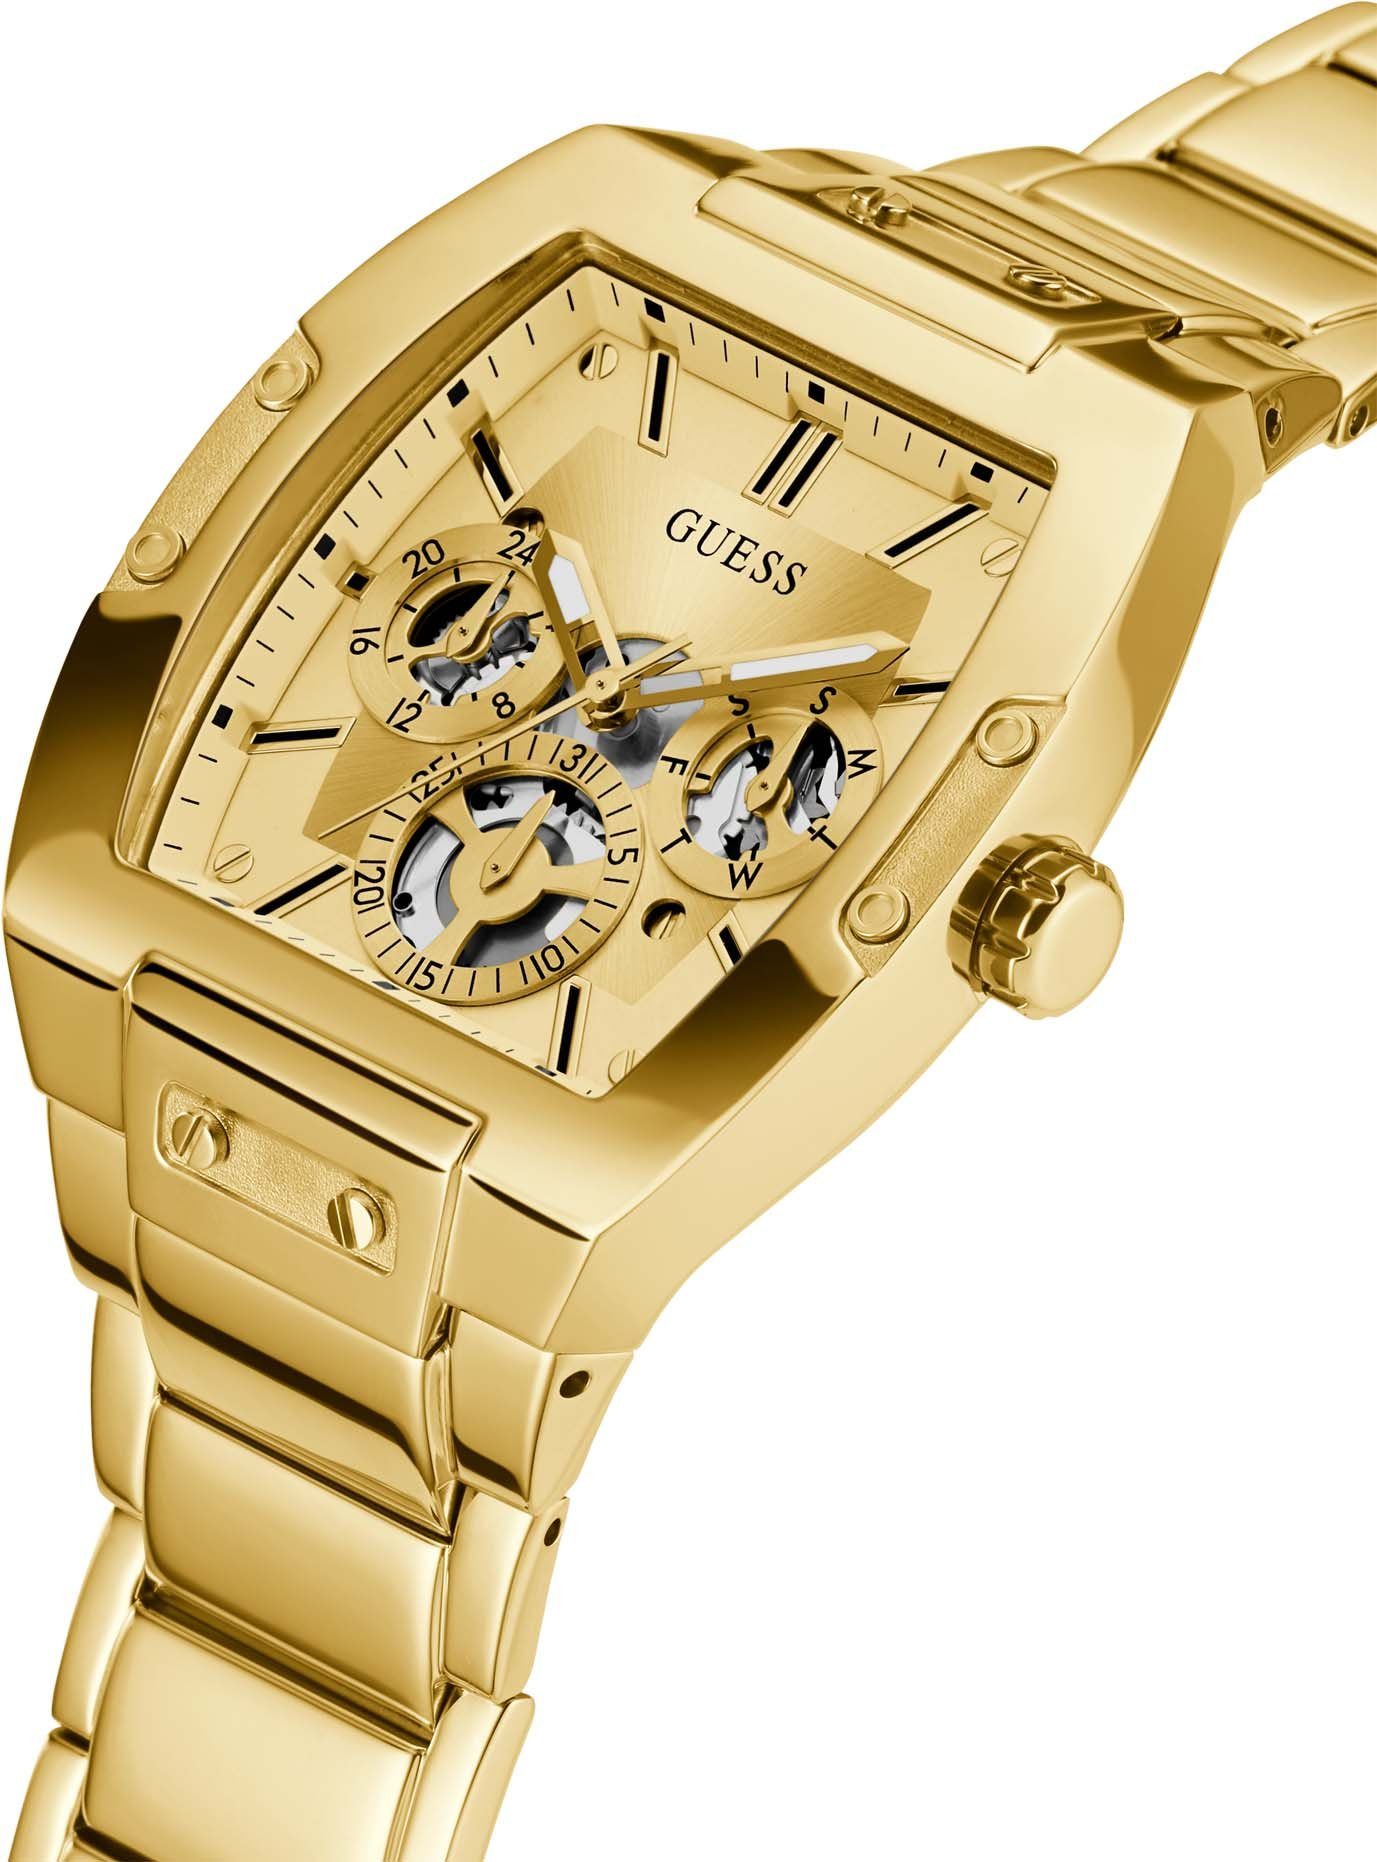 Guess Multifunktionsuhr GW0456G2